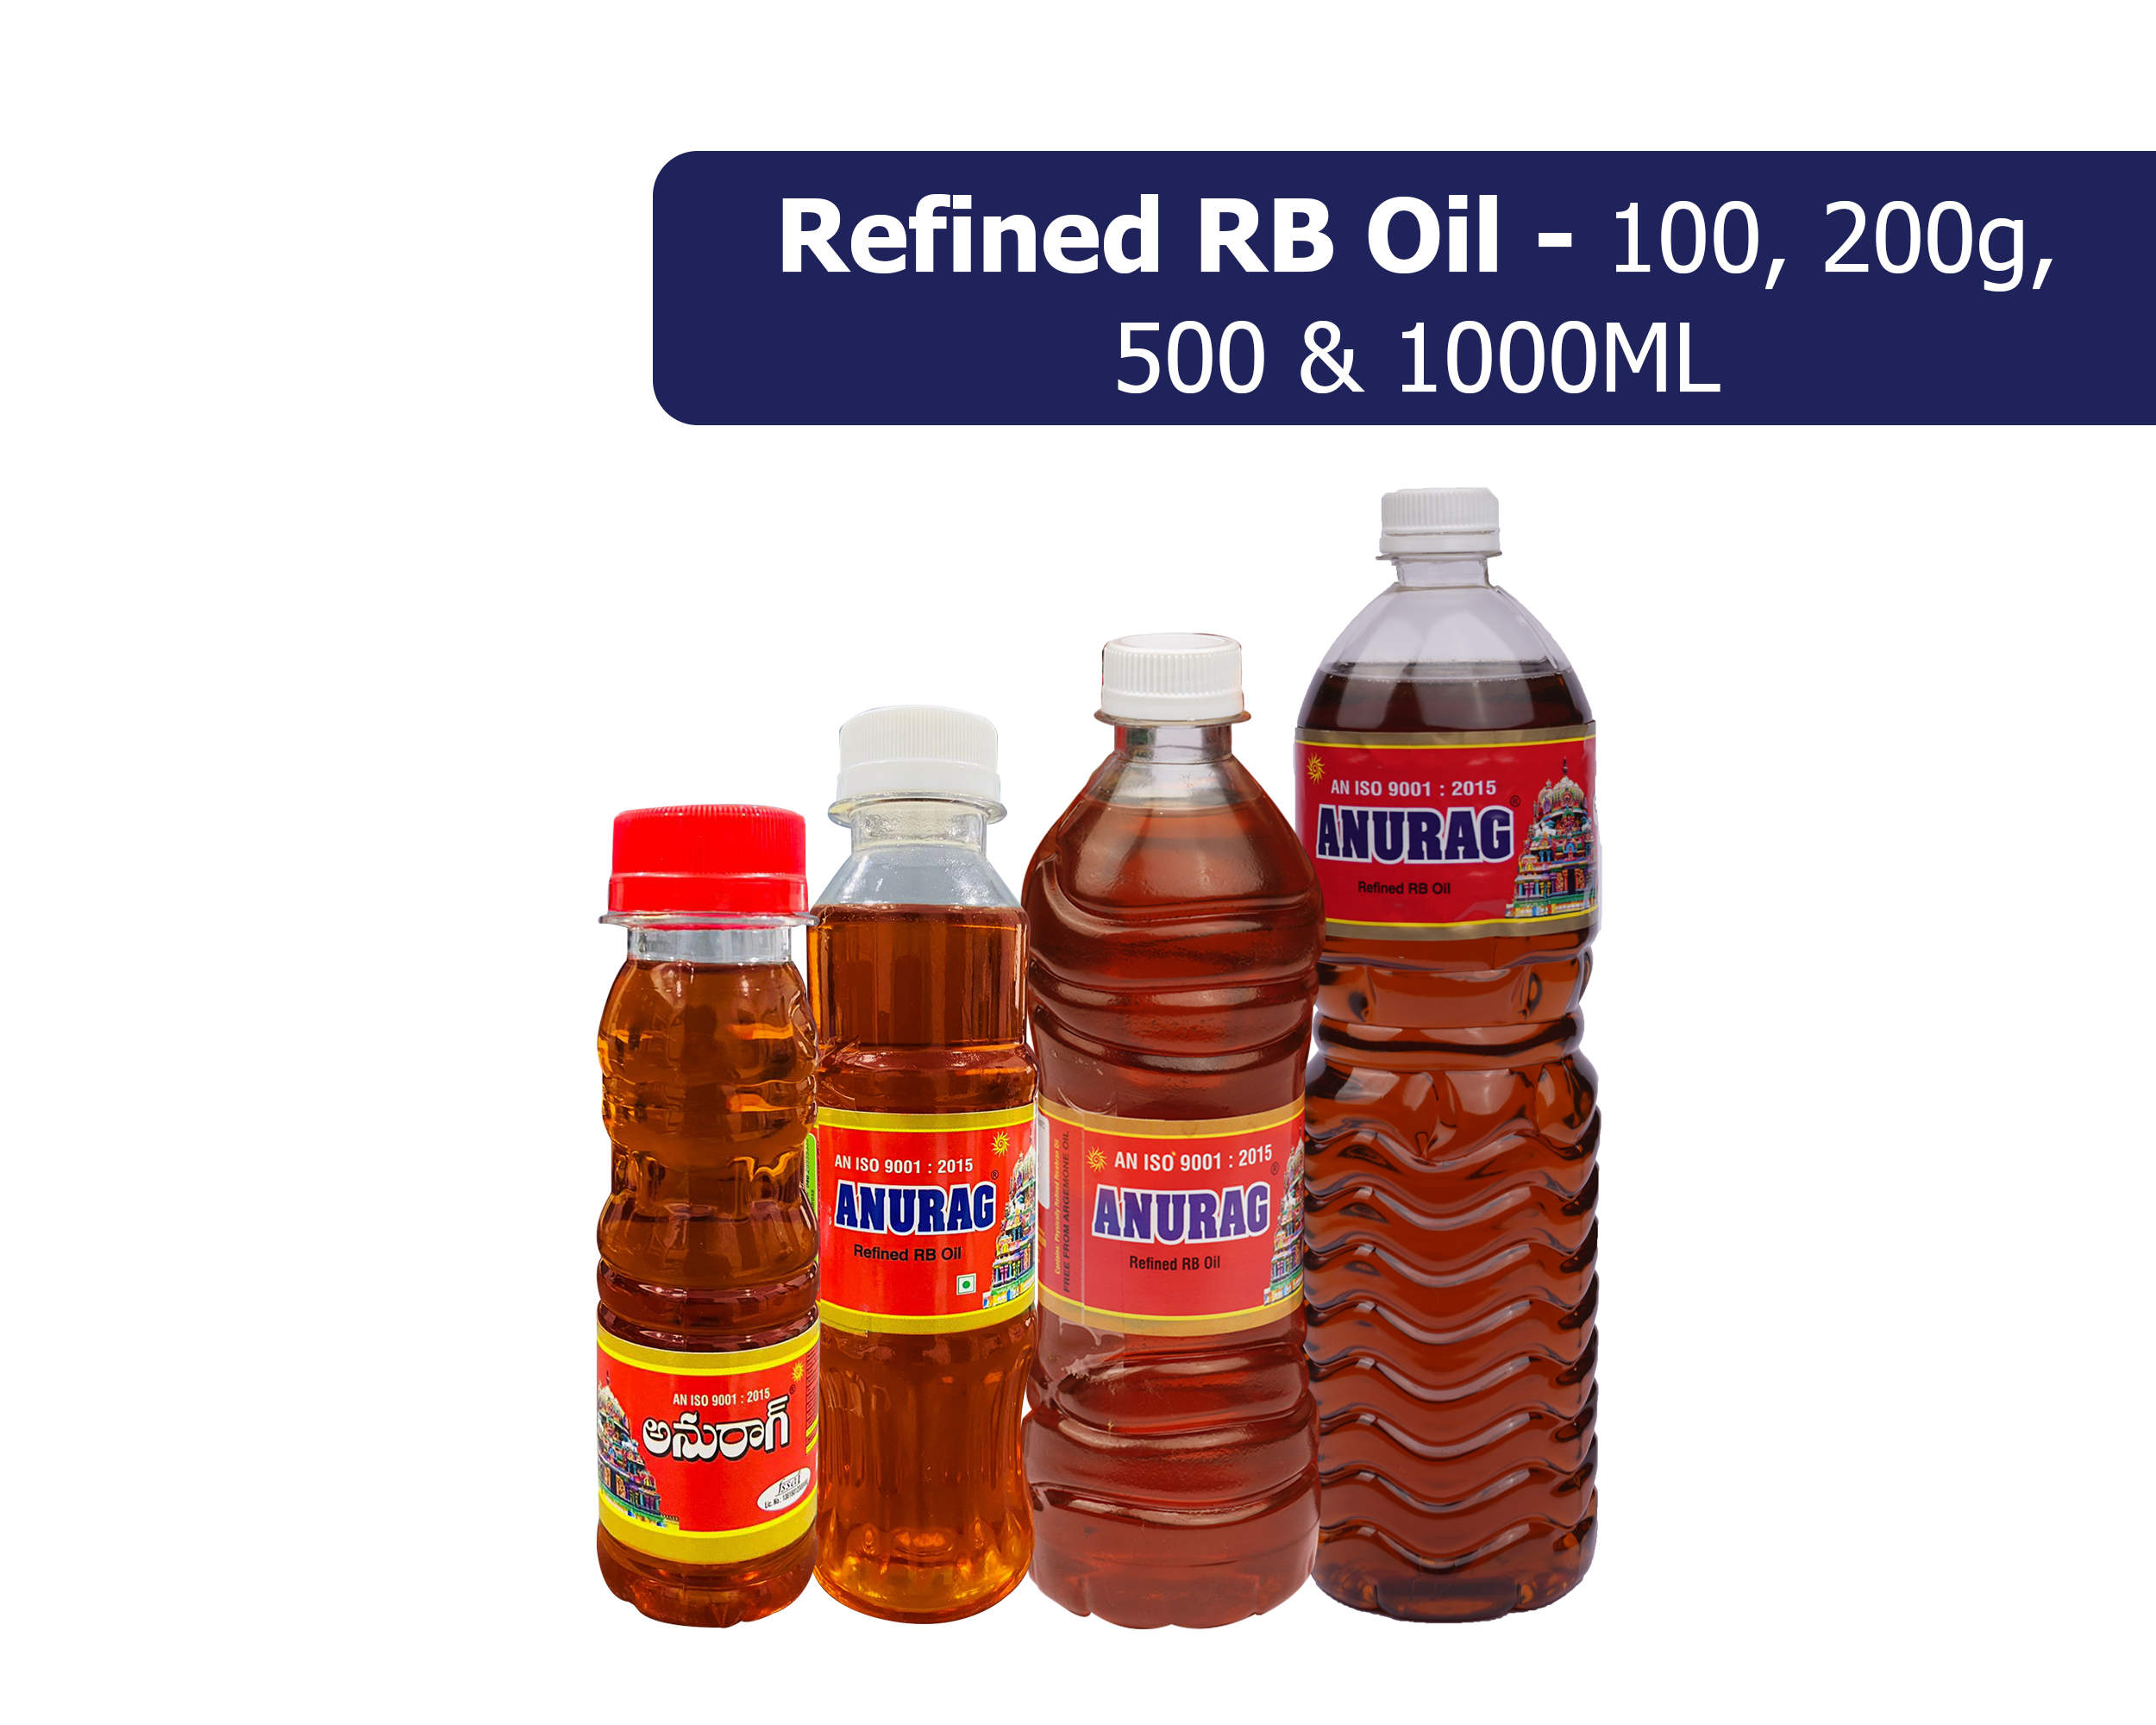 RB Refined Oil